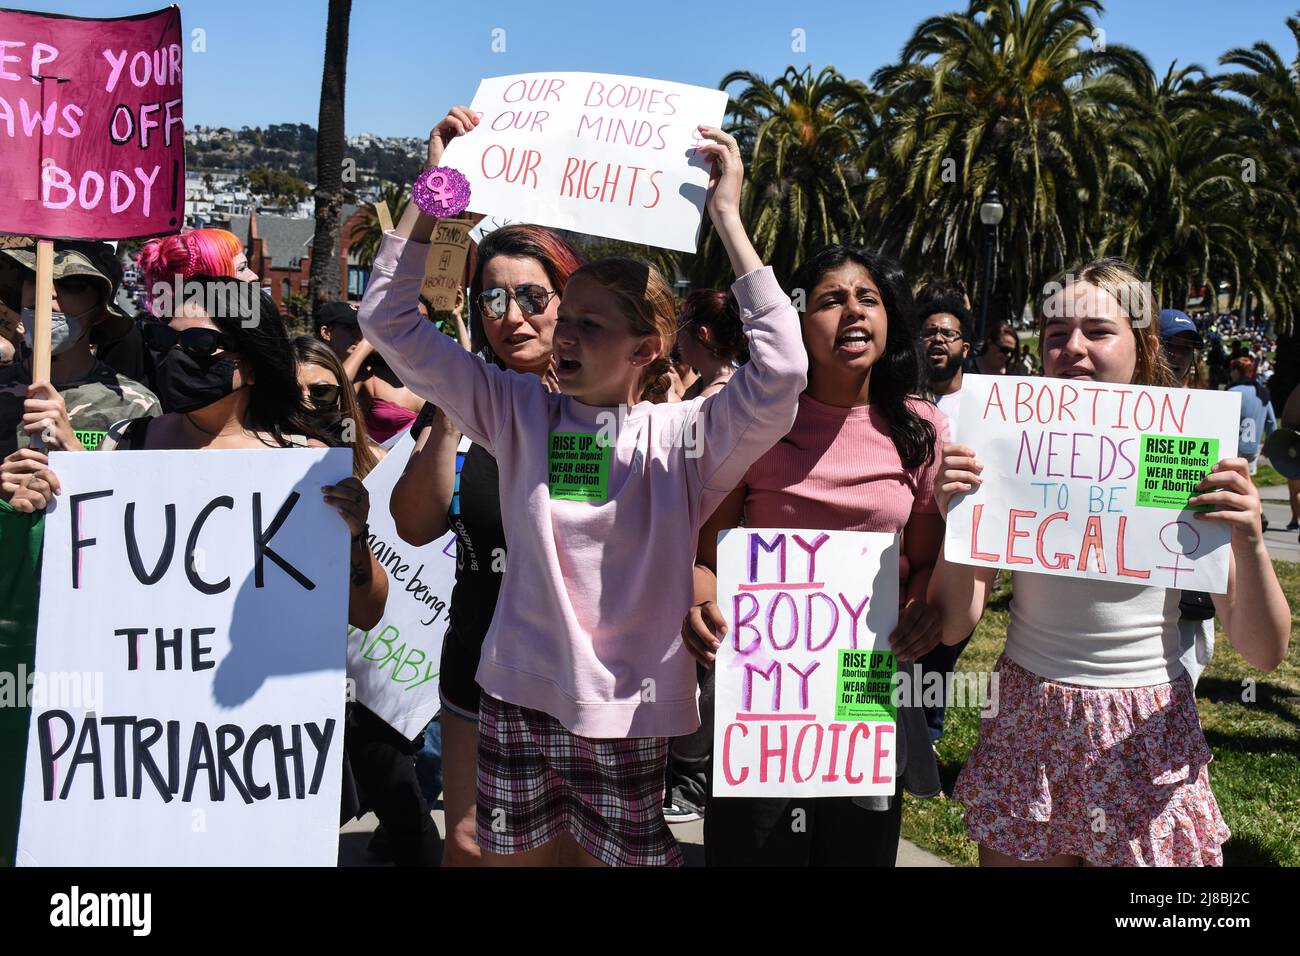 A diverse range of protestors took to the streets in a demonstration to defend abortion rights, including a group of young girls in pink who made their own posters. Protests erupted in cities across the country when a leaked document revealed that the Supreme Court has drafted an opinion to overturn Roe Vs. Wade, which would make abortion after six-weeks illegal in many states. Stock Photo